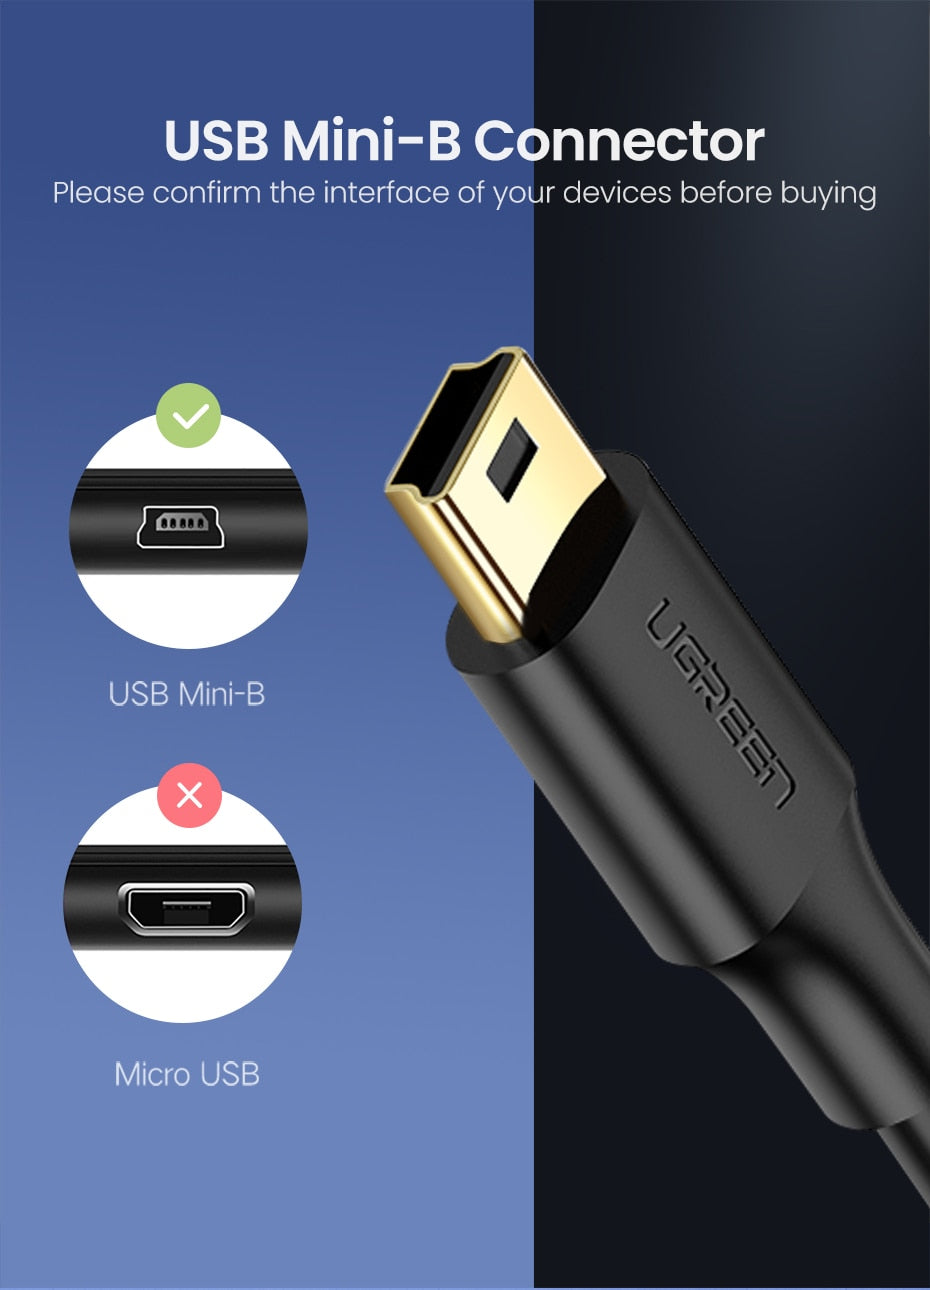 Ugreen Mini USB Cable Mini USB to USB Fast Data Charger Cable - DG Services